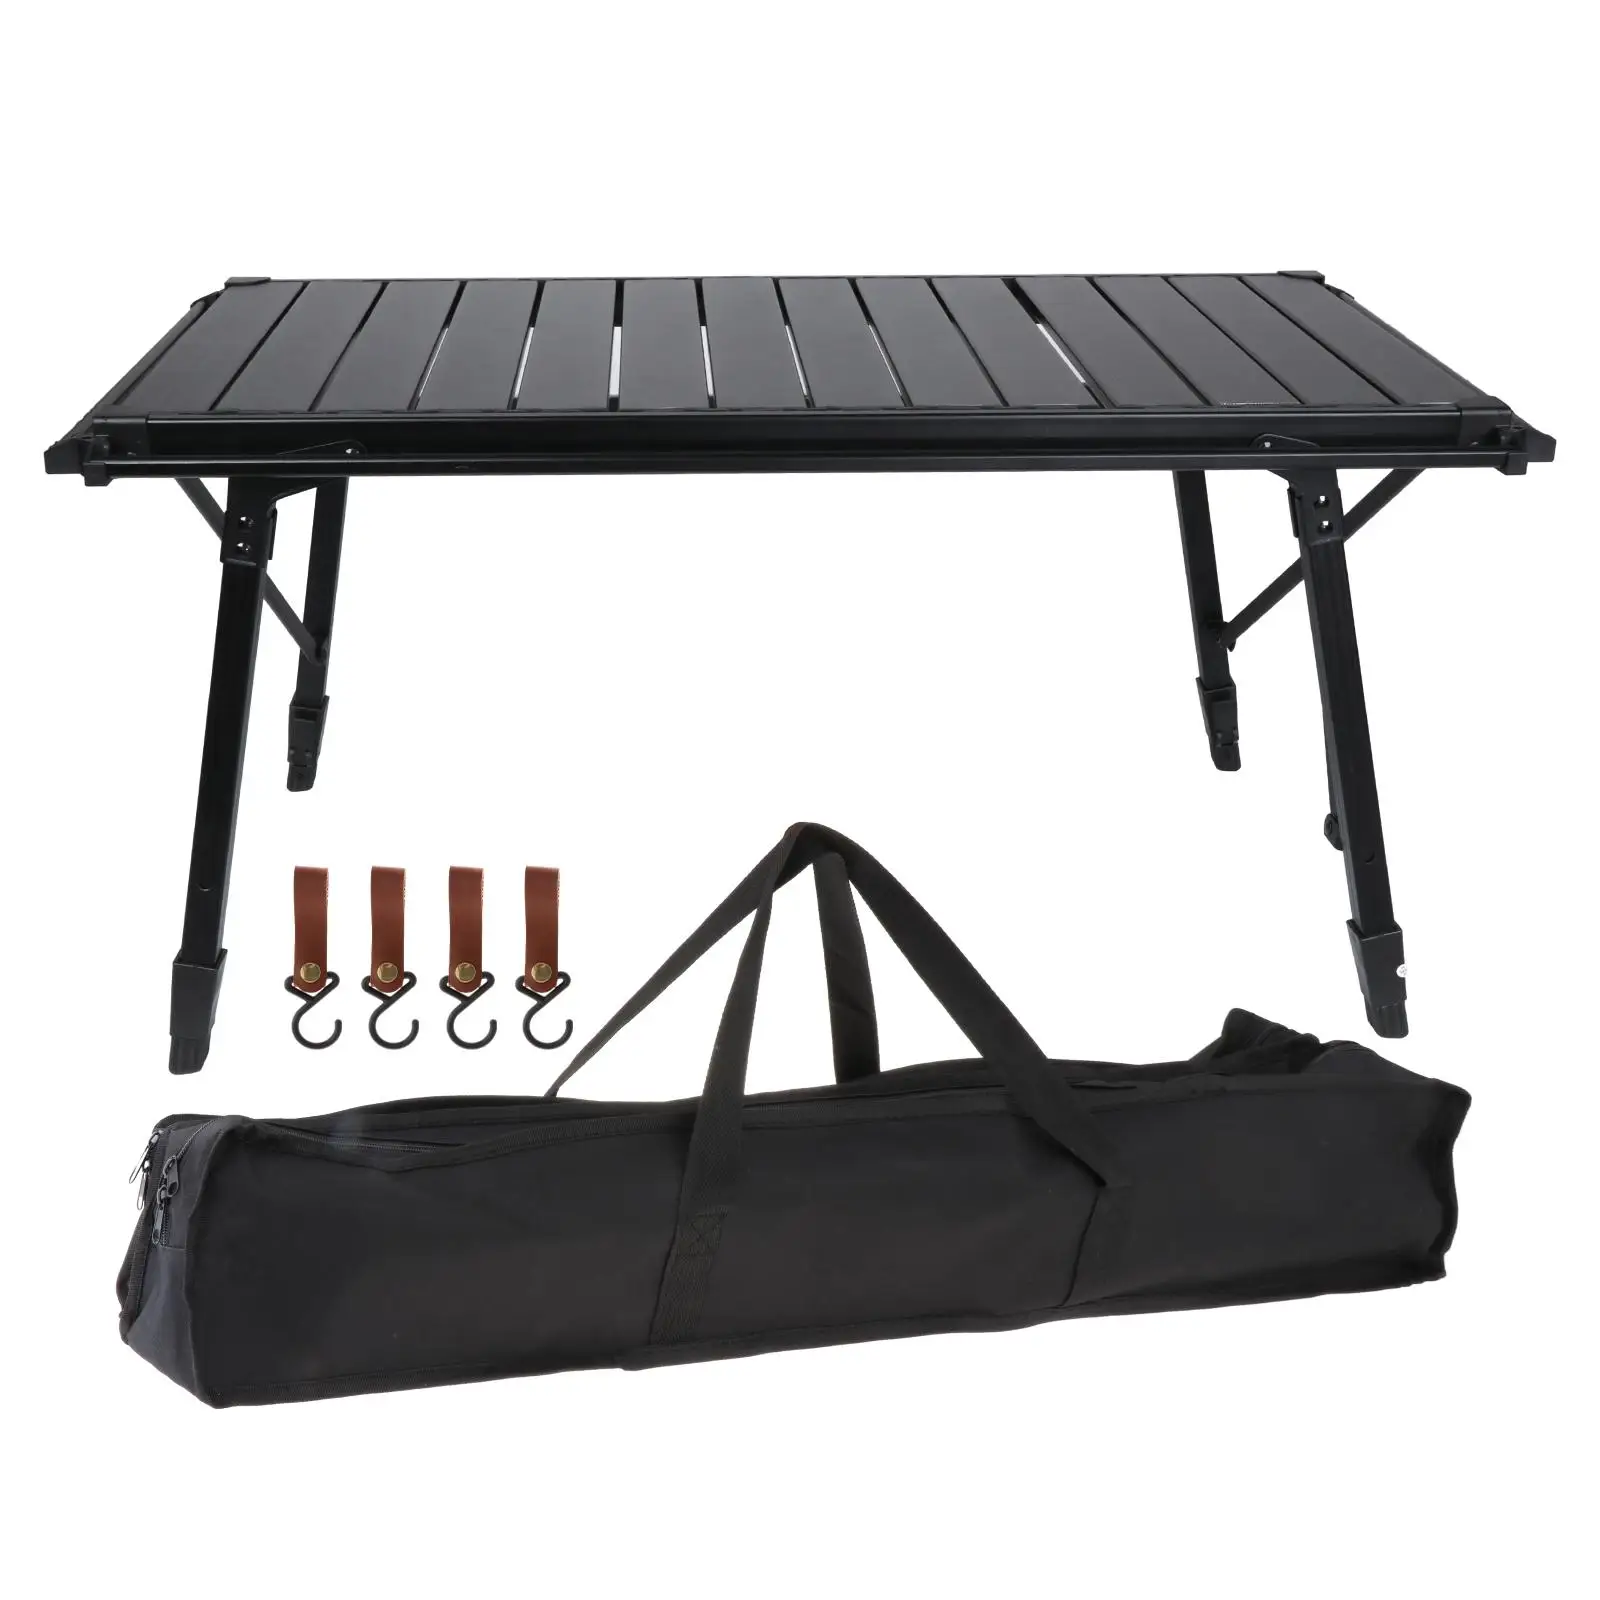 Camping Folding Table Easy to Carry with Storage Carrying Bags Outdoor Table for Picnic Backyard Hiking Outdoor Indoor Deck